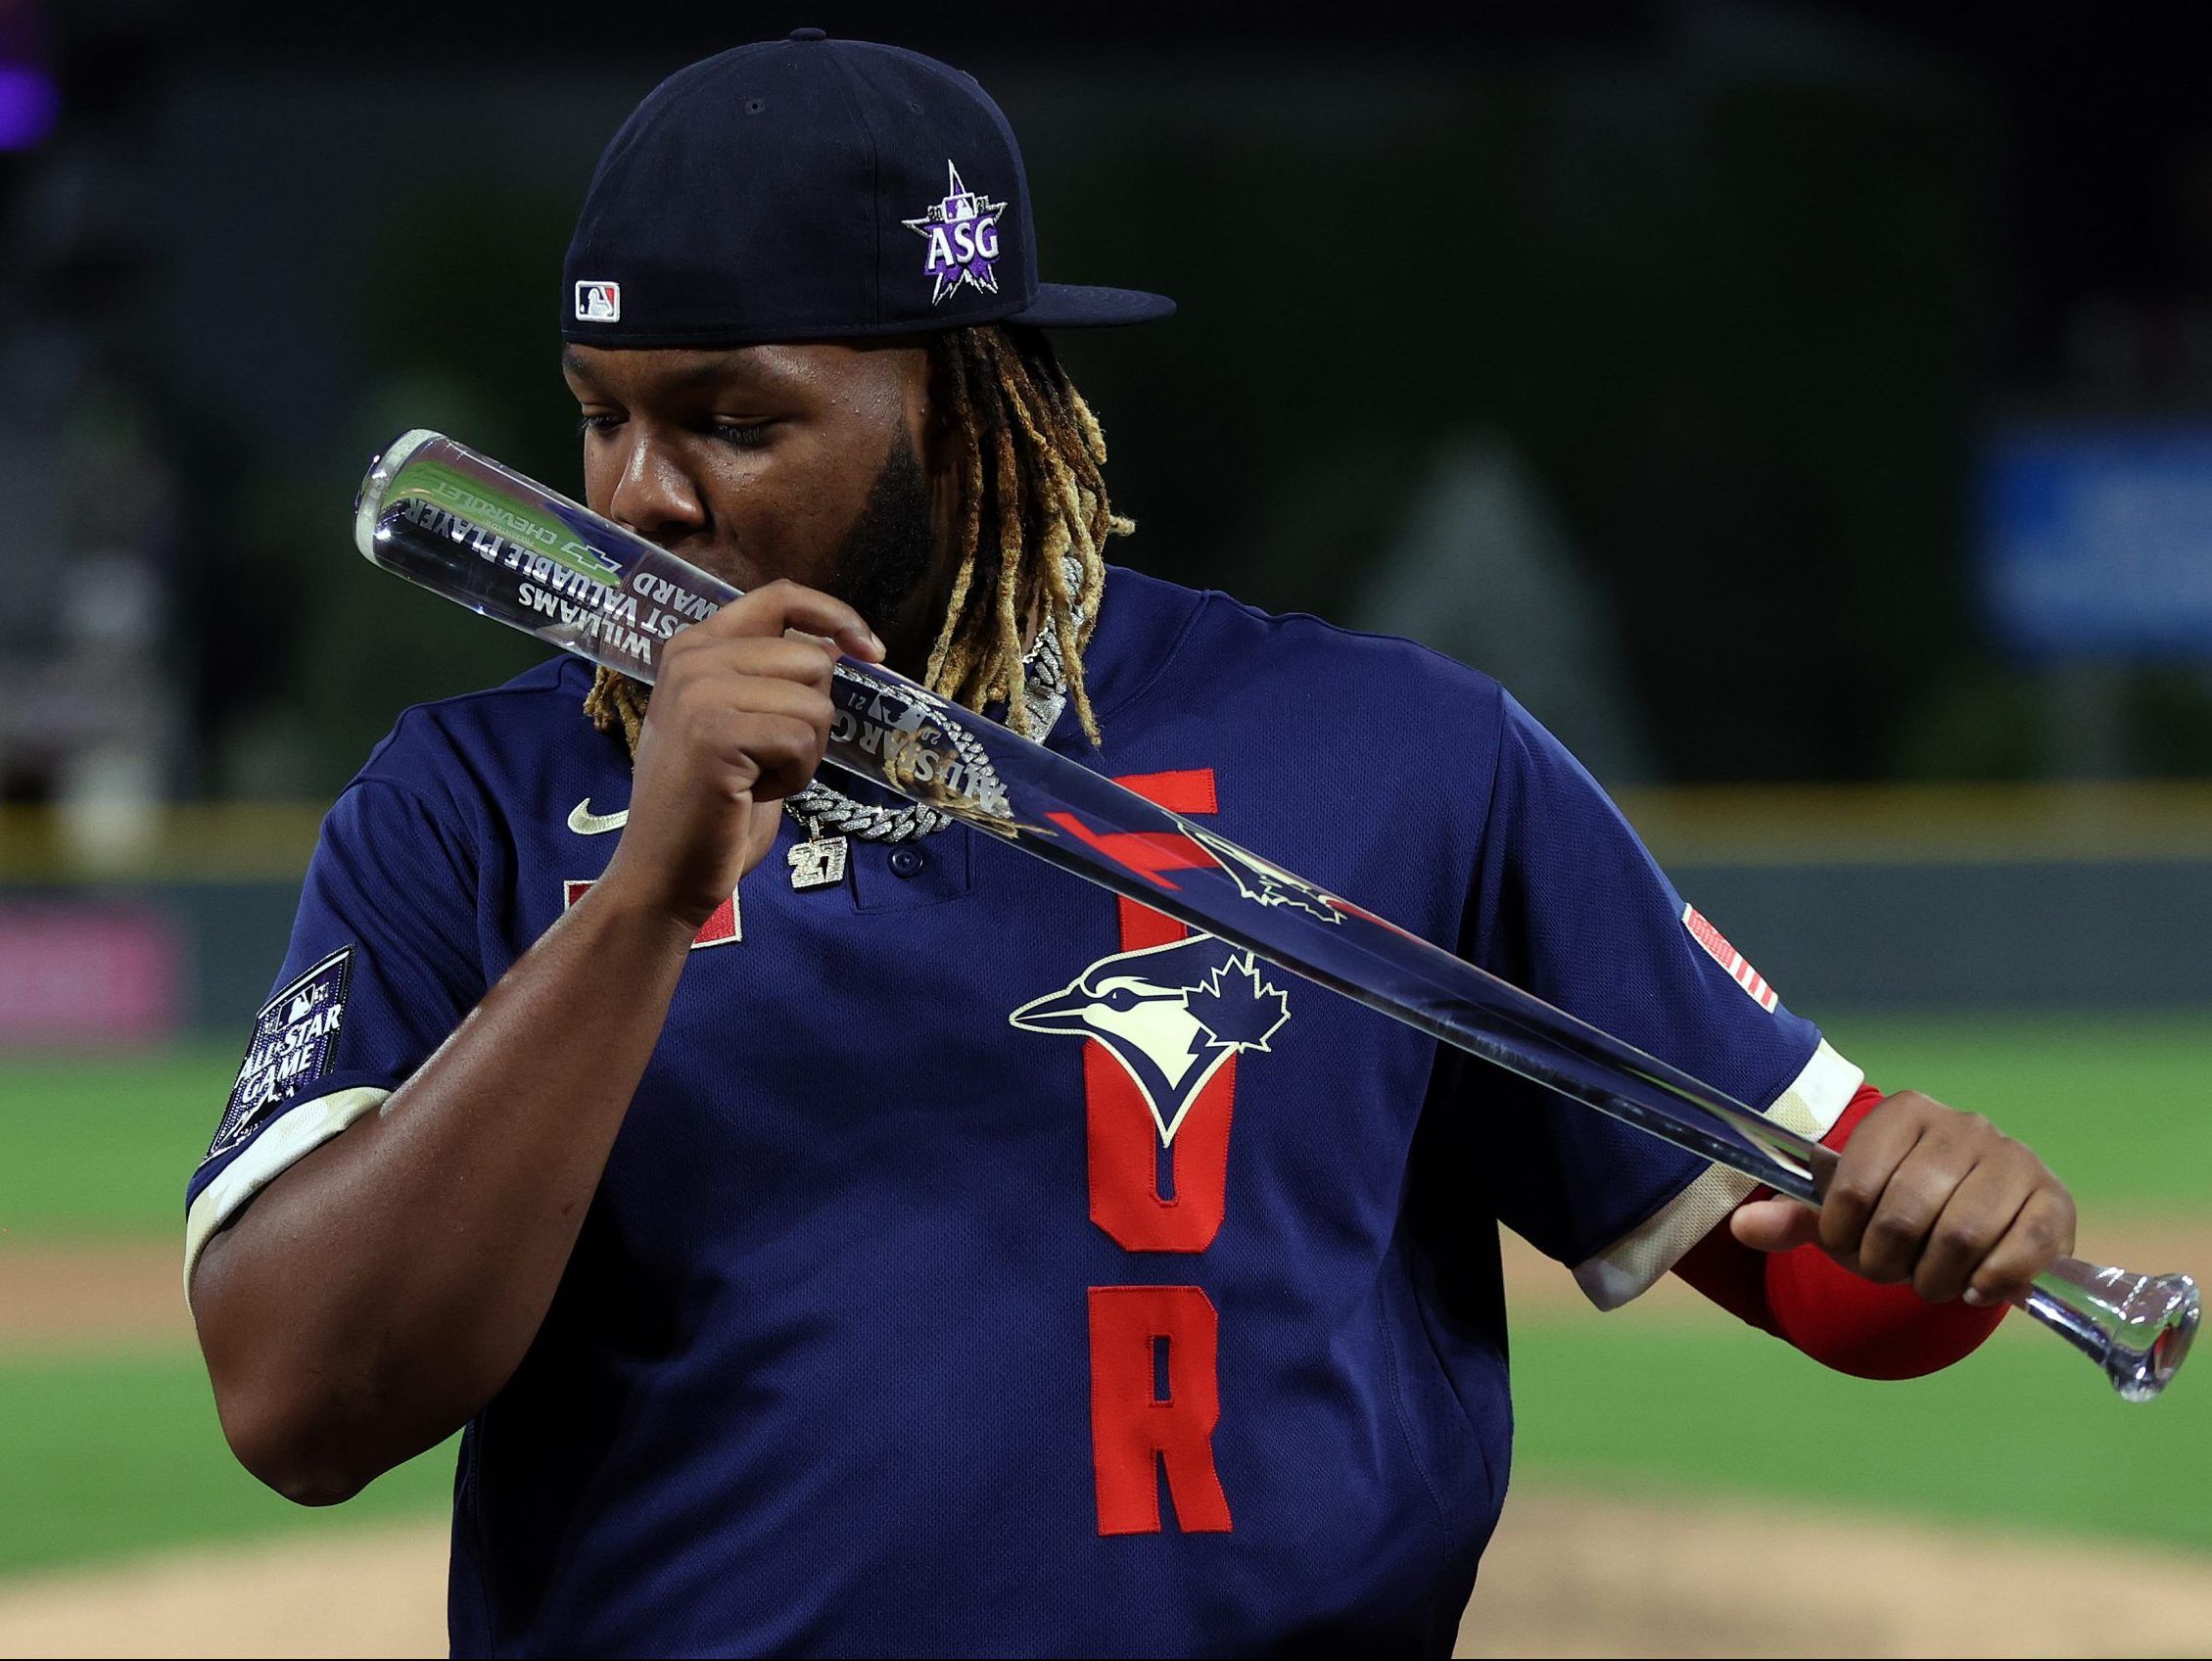 Toronto Blue Jays: Guerrero Jr. makes statement with All-Star Game